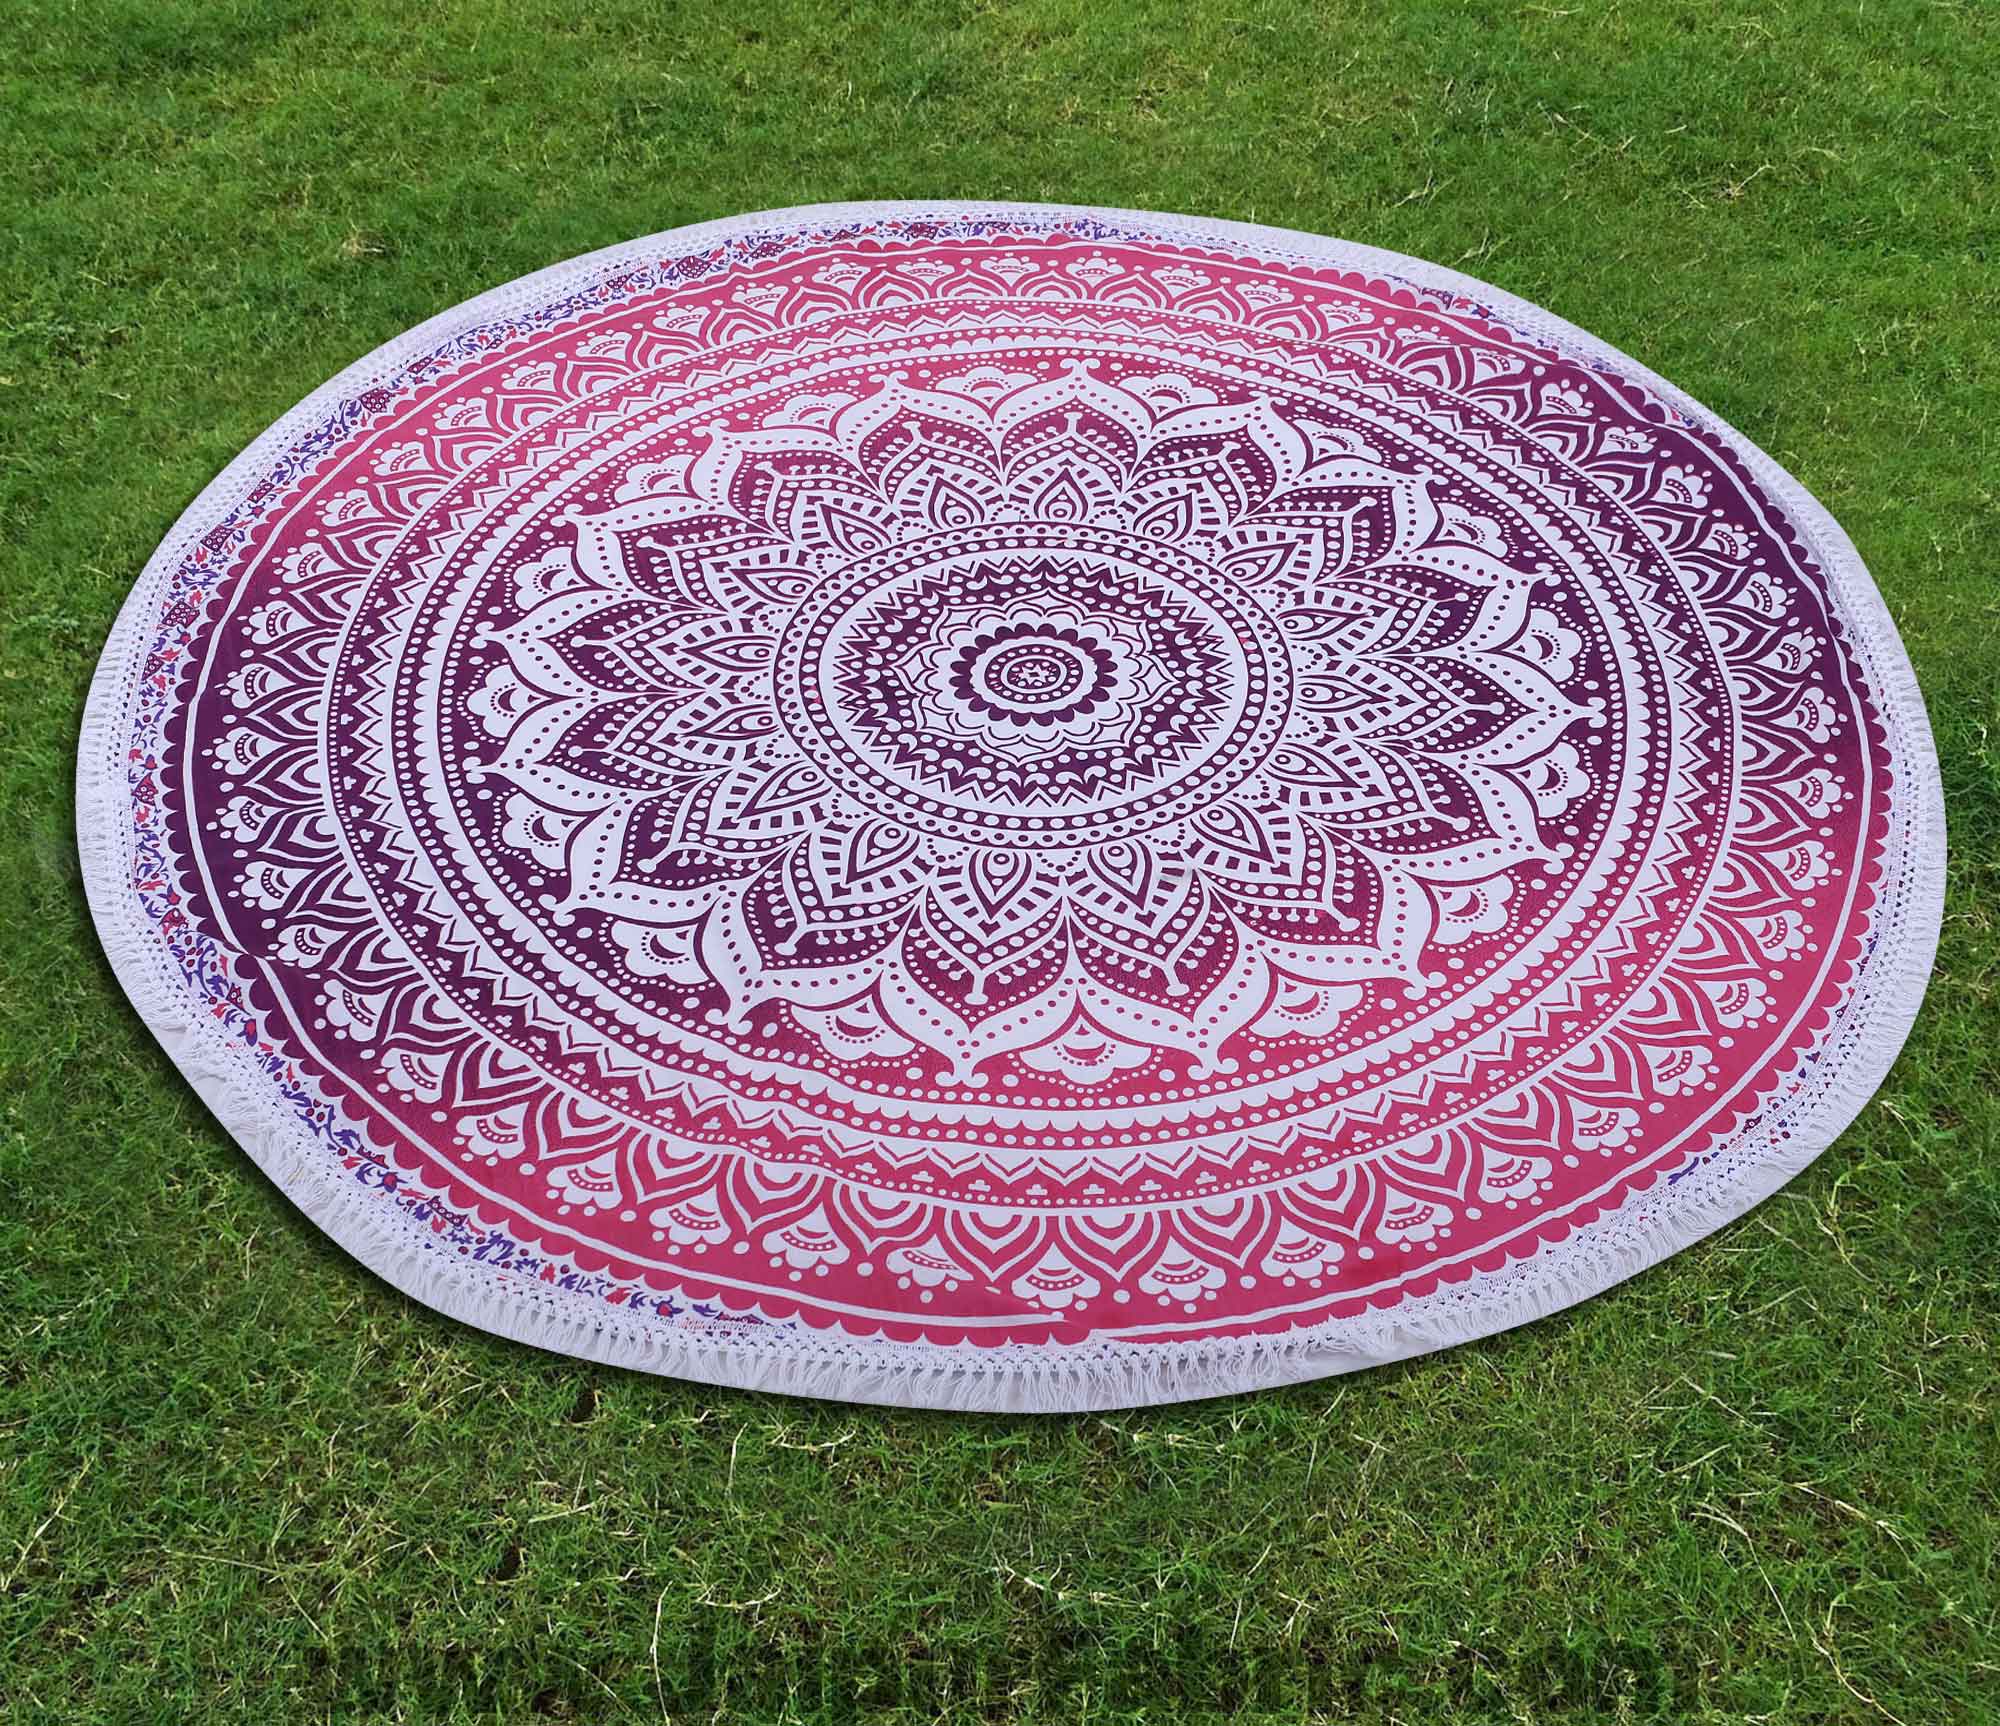 Pink Ombre Mandala Printed Wall Hanging Round Roundies Beach Throw Cotton Yoga Mat Table Cloths Table Cover Picnic Mat Tapestry Picnic Blanket Mat 72